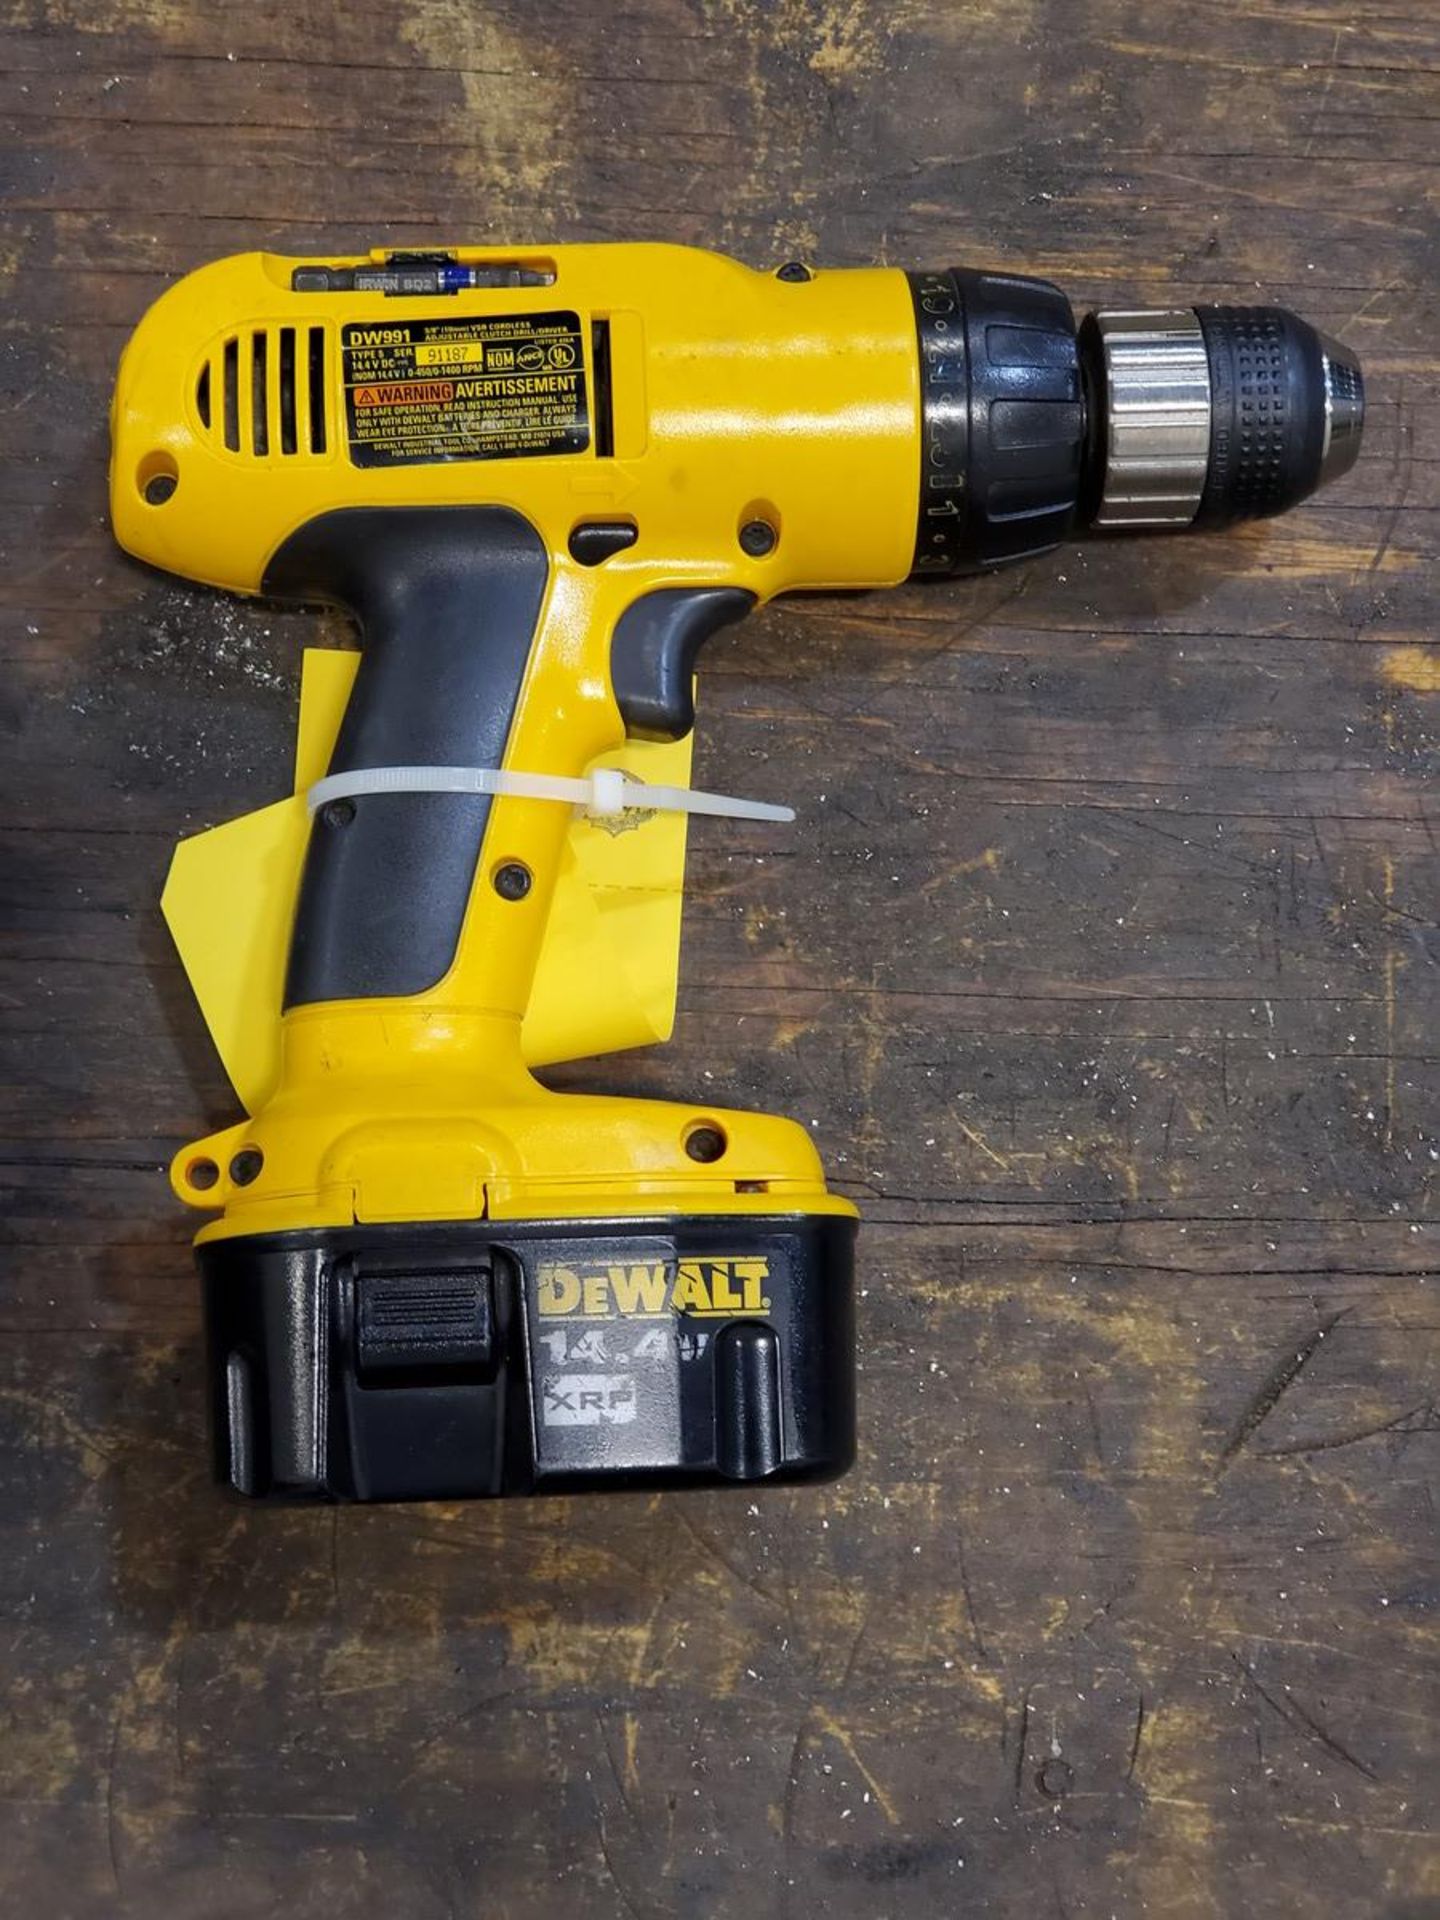 Dewalt DW991 1/2" Cordless Drill 14.4V, w/ Charger - Image 3 of 3